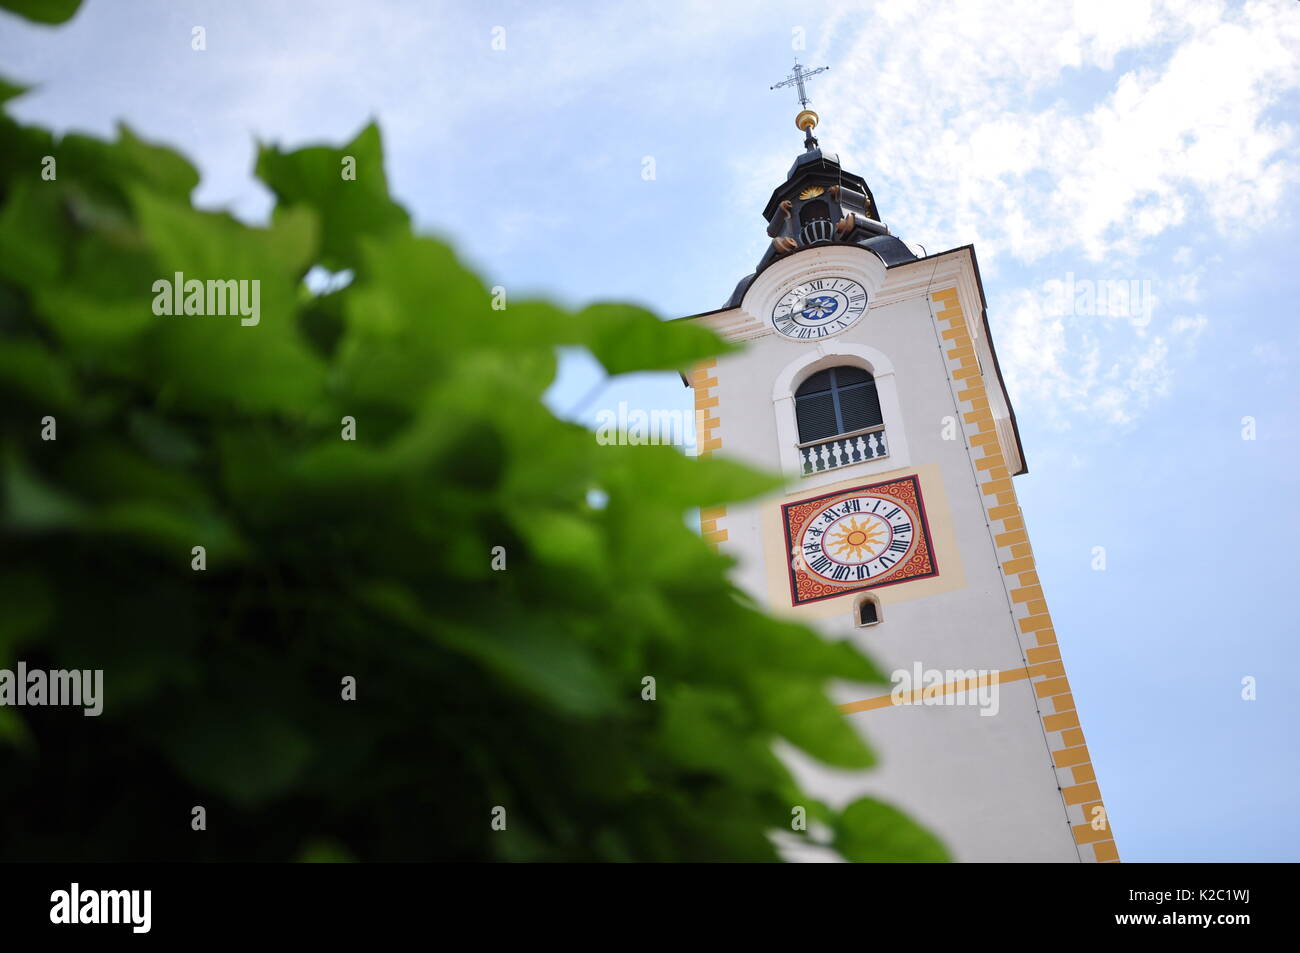 Catholic church bell rising from beyond the trees Stock Photo